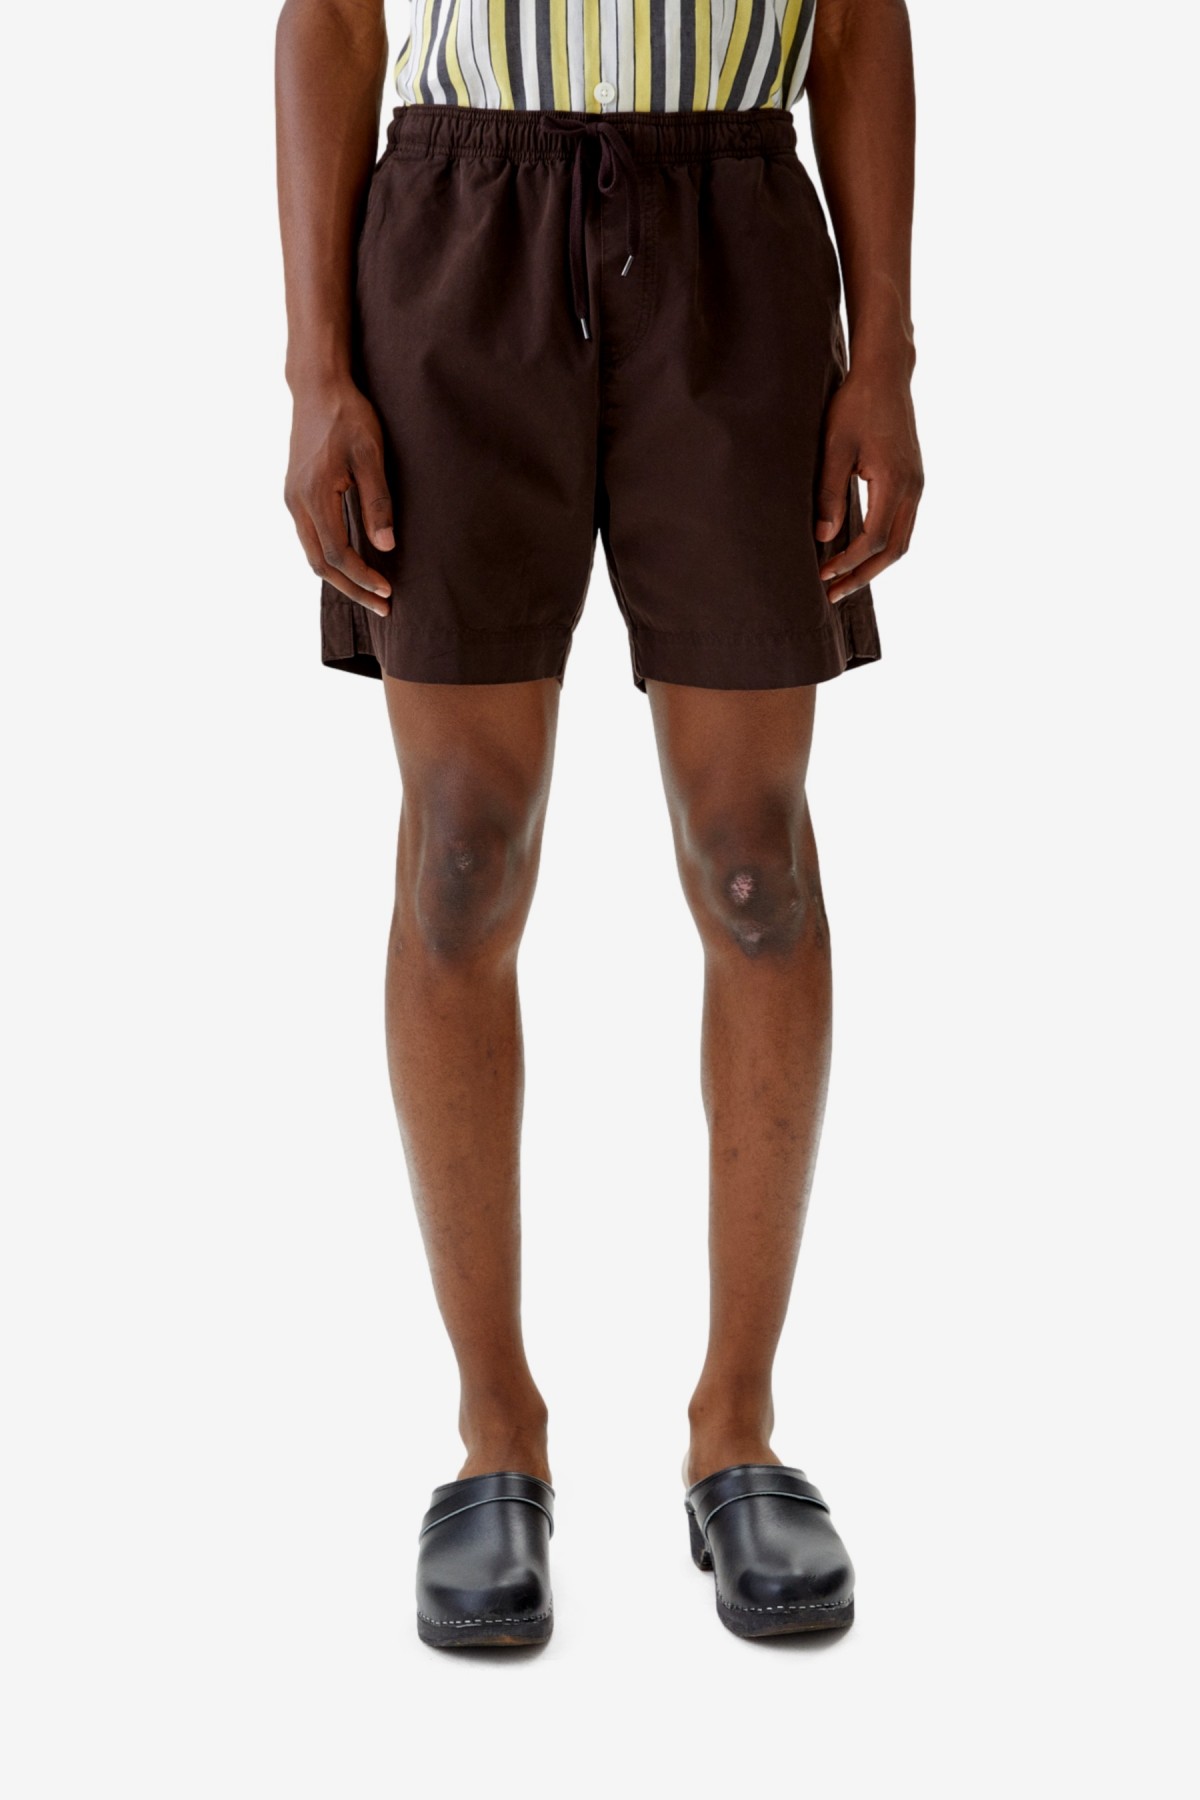 Schnayderman’s Shorts Twill Gd in Chocolate